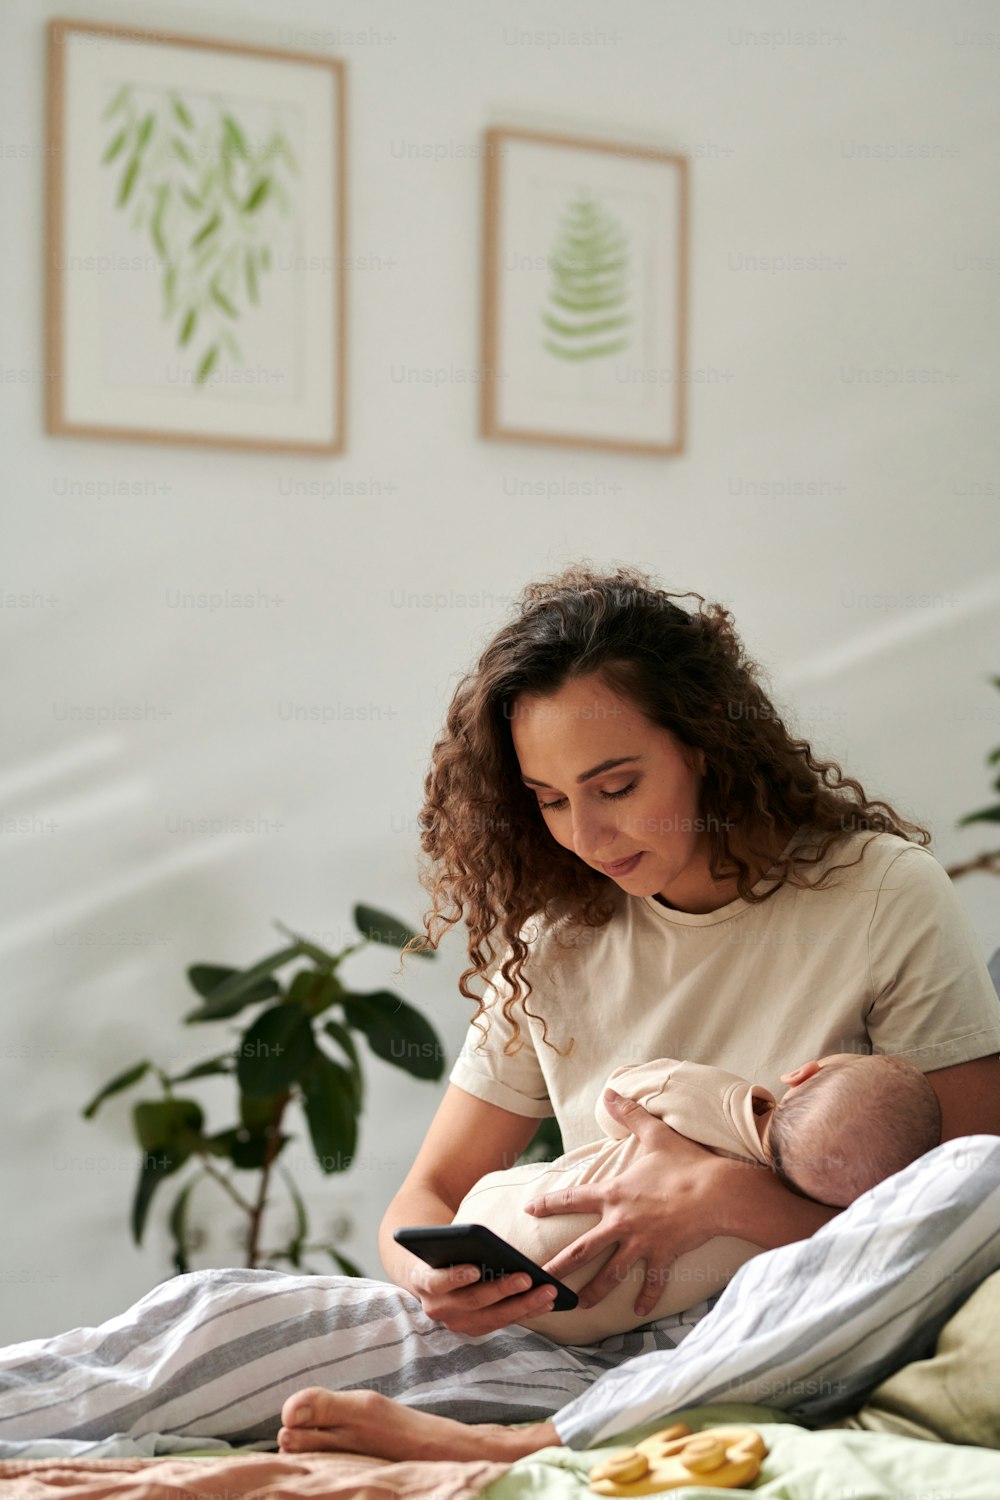 Young mother with baby on hands texting in mobile phone while sitting on comfortable double bed against wall with pictures in frames